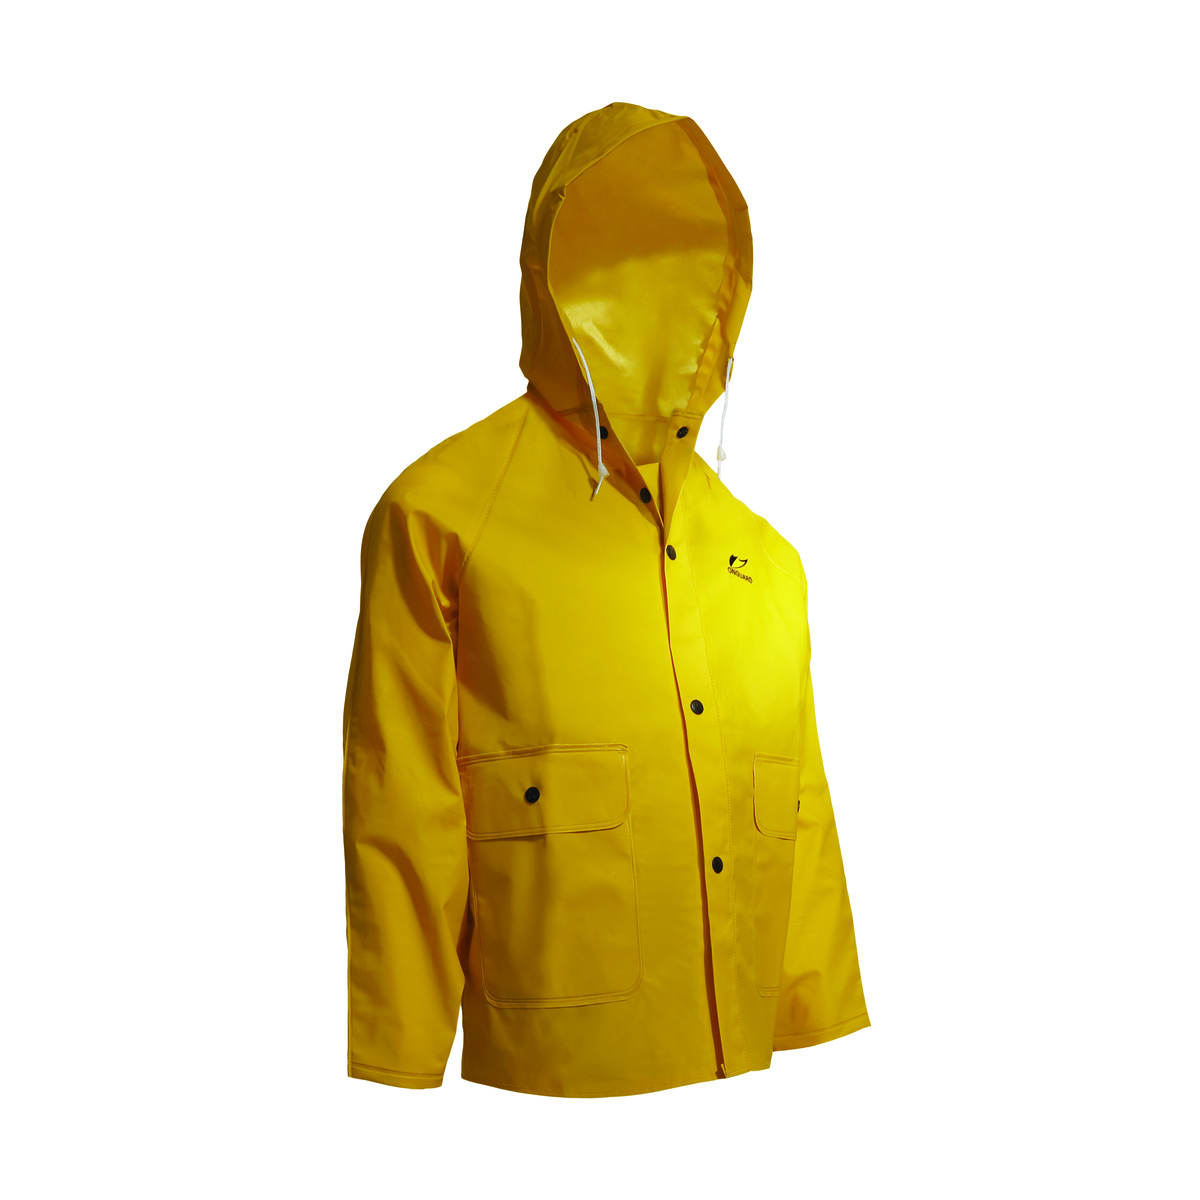 Dunlop® Protective Footwear 3X Yellow Sitex .35 mm Polyester/PVC Rain Jacket With Attached Hood